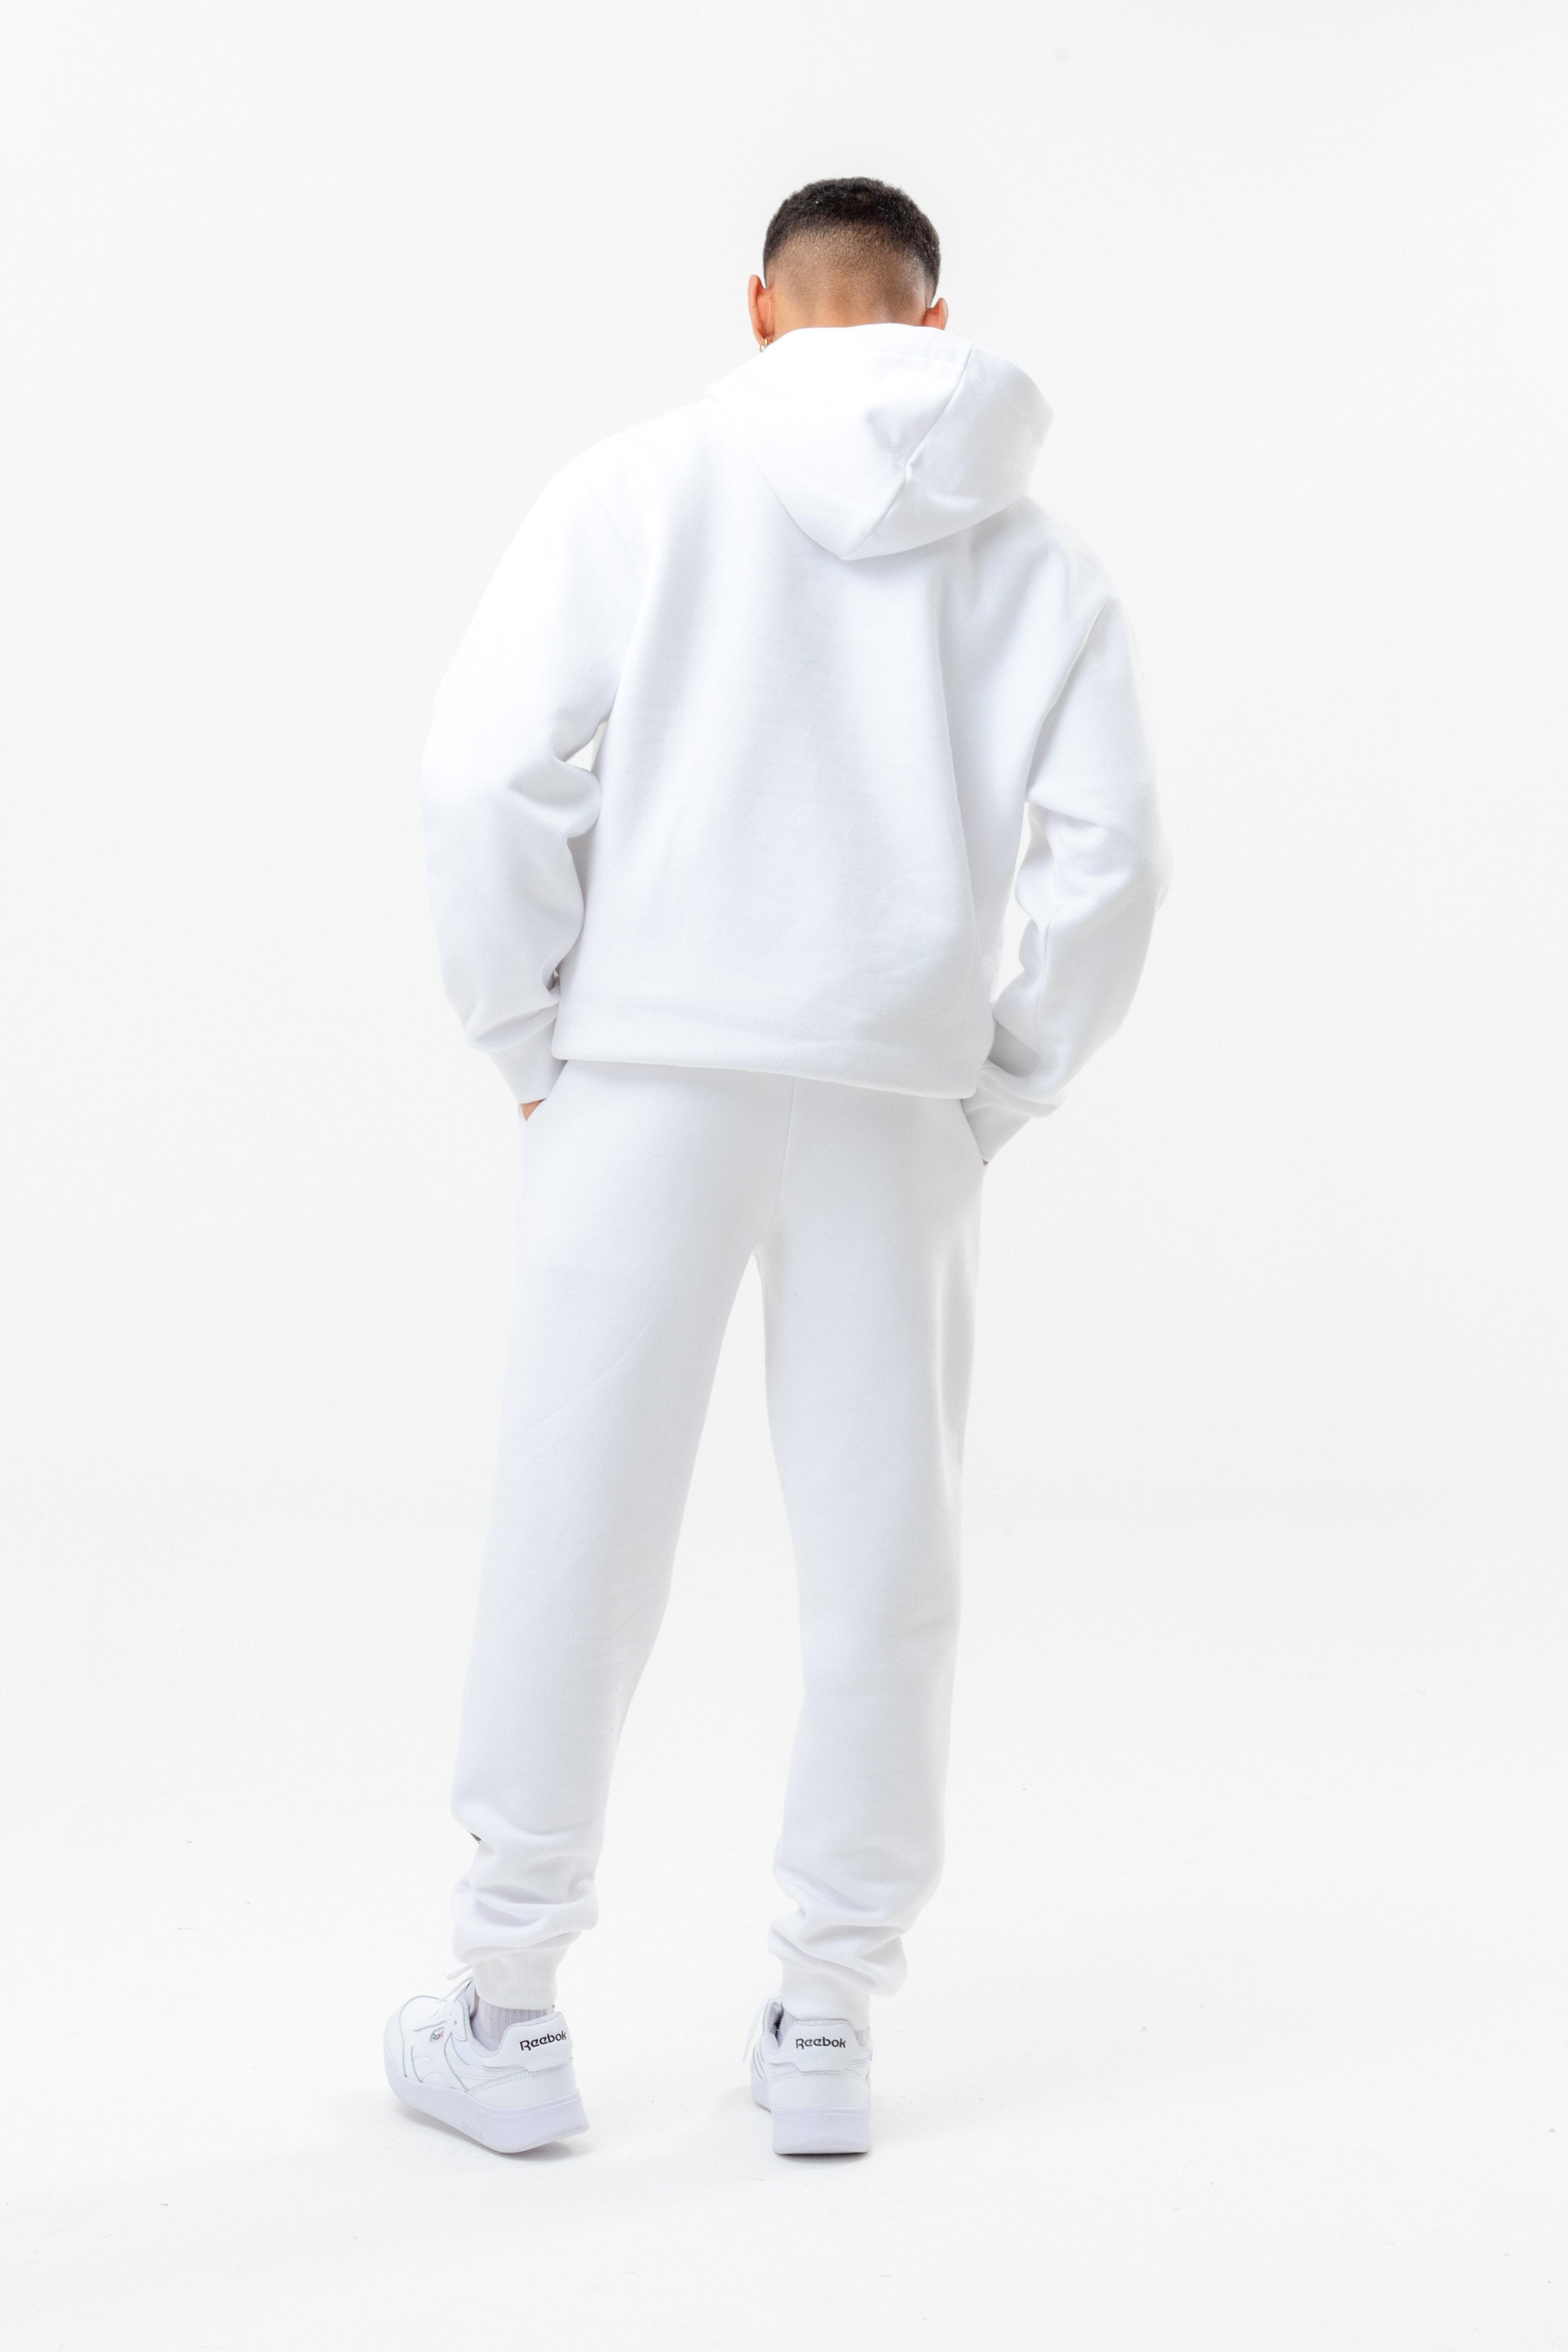 Alternate View 6 of CONTINU8 WHITE JOGGERS